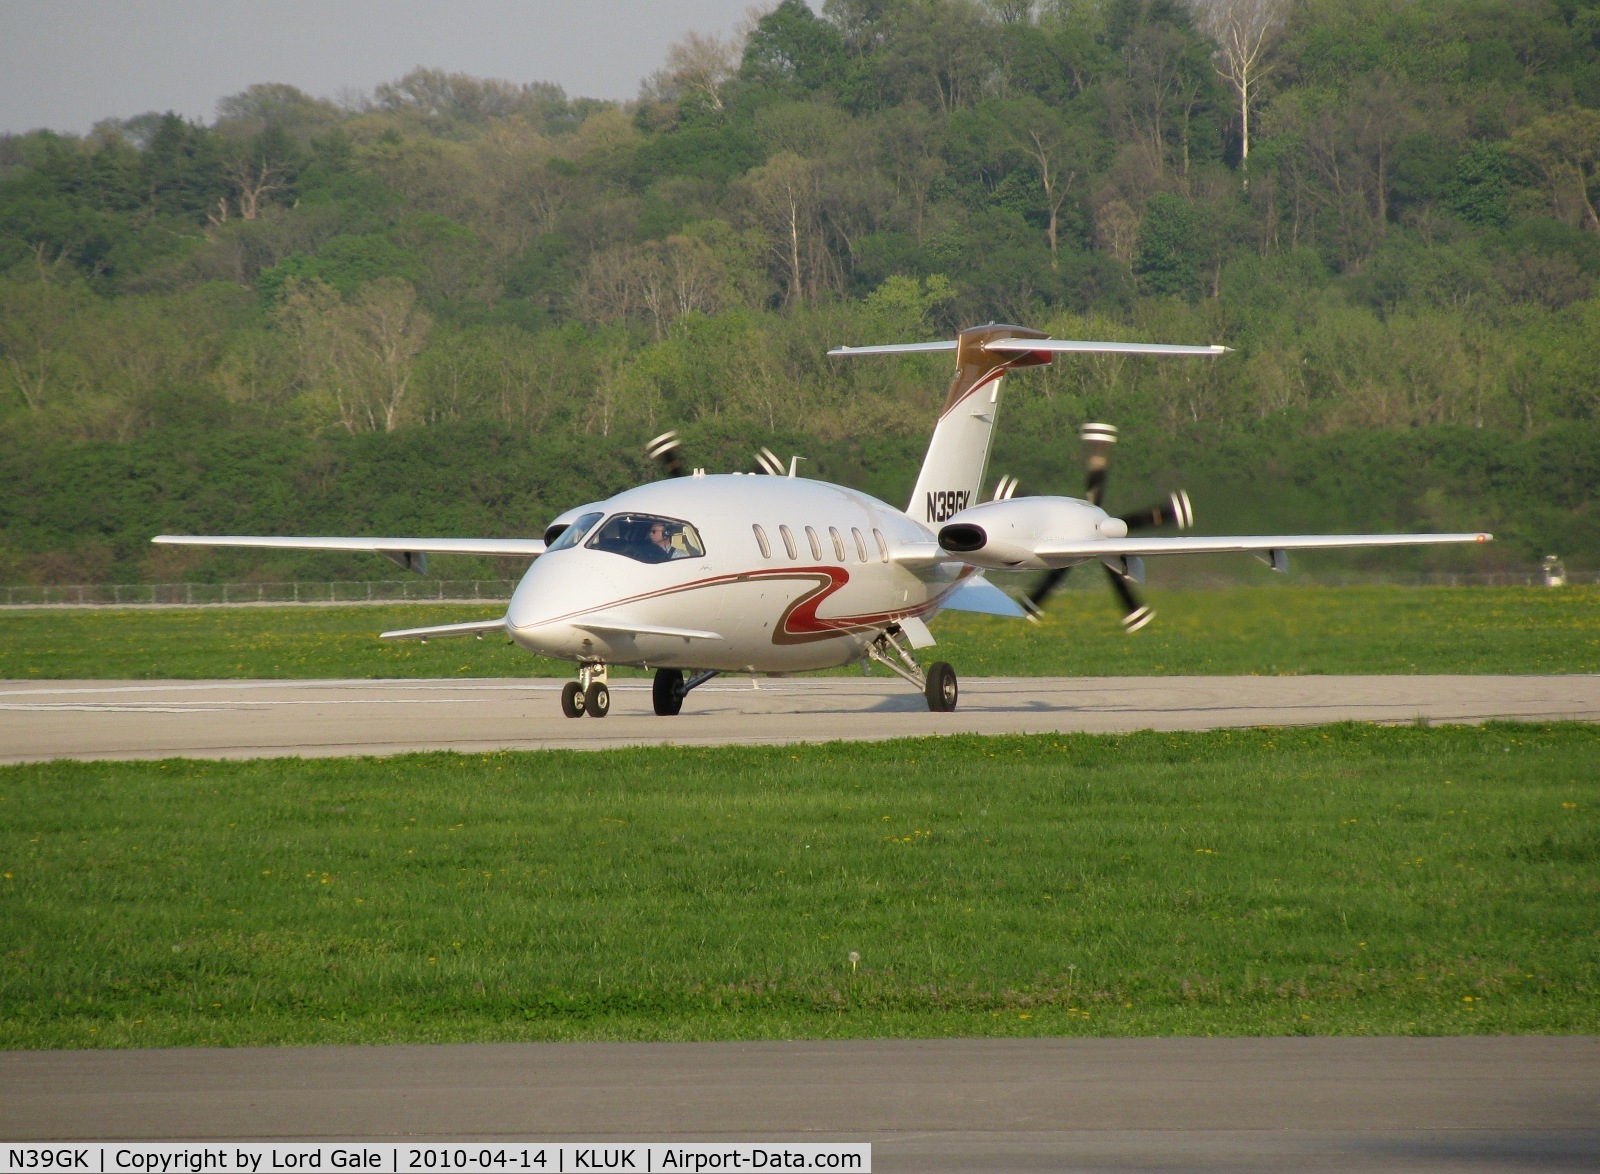 N39GK, 2000 Piaggio P-180 Avanti C/N 1039, One of only two non-Avantair catfish I've photographed. Another Lunken 